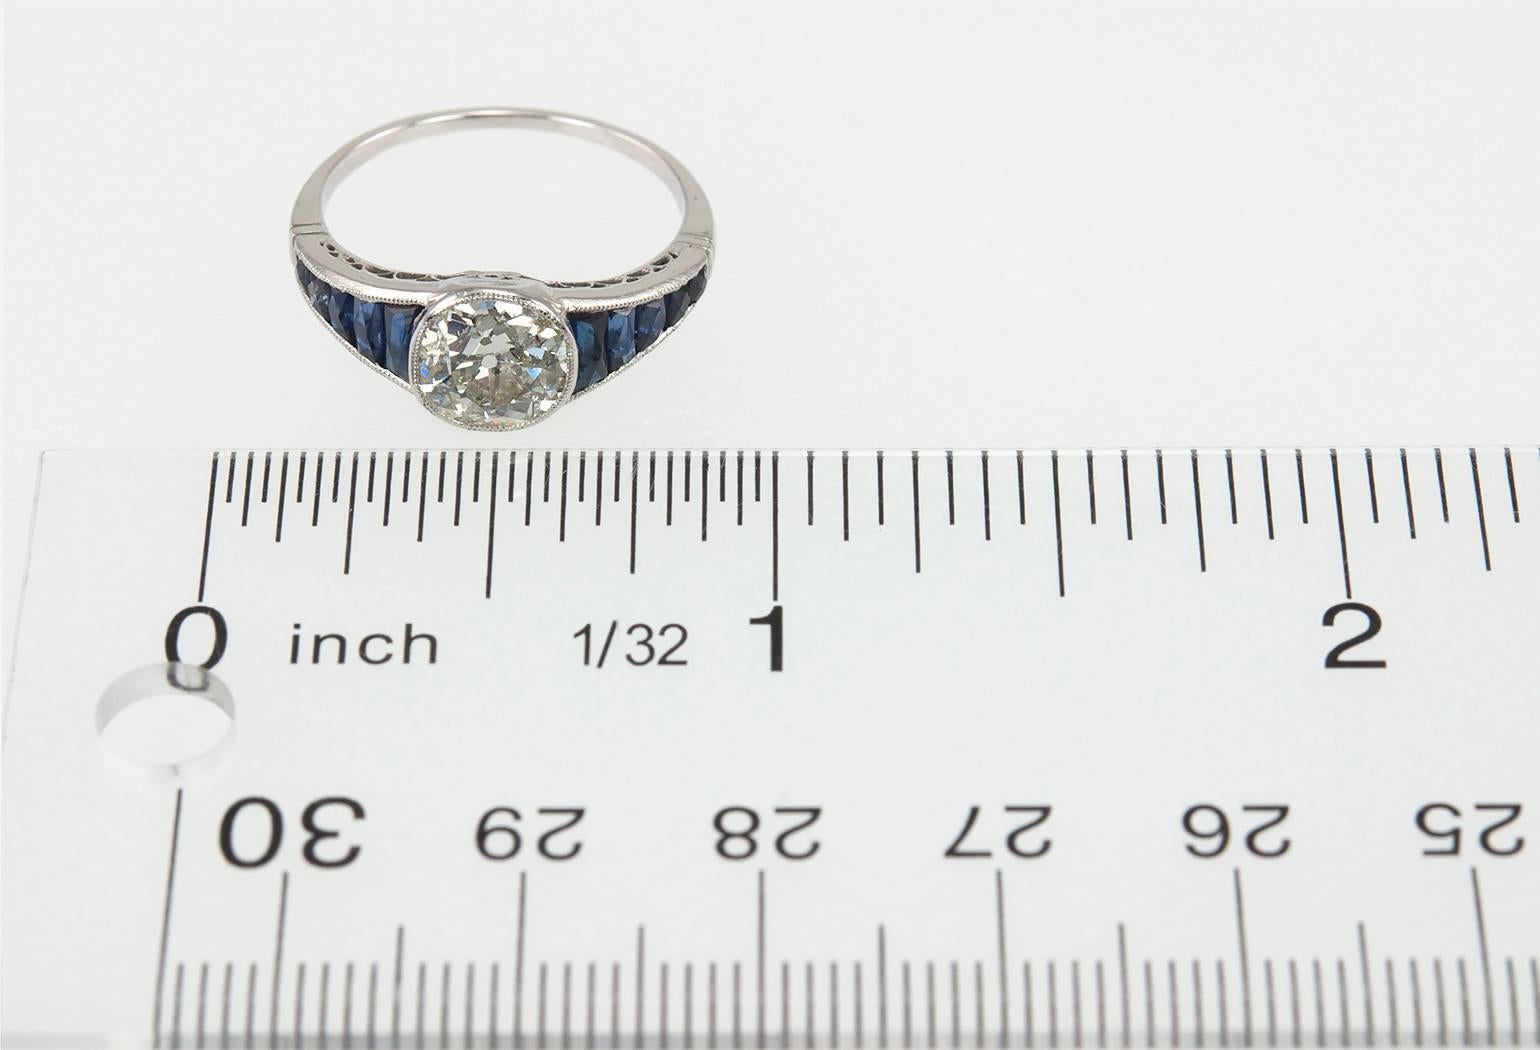 A gorgeous Edwardian diamond platinum engagement ring with 10 calibre cut blue sapphires.  The center bezel set diamond is an Old Mine Cut diamond that is approximately 1.65 carats and K in color and I1 in clarity.  This ring has a low profile and